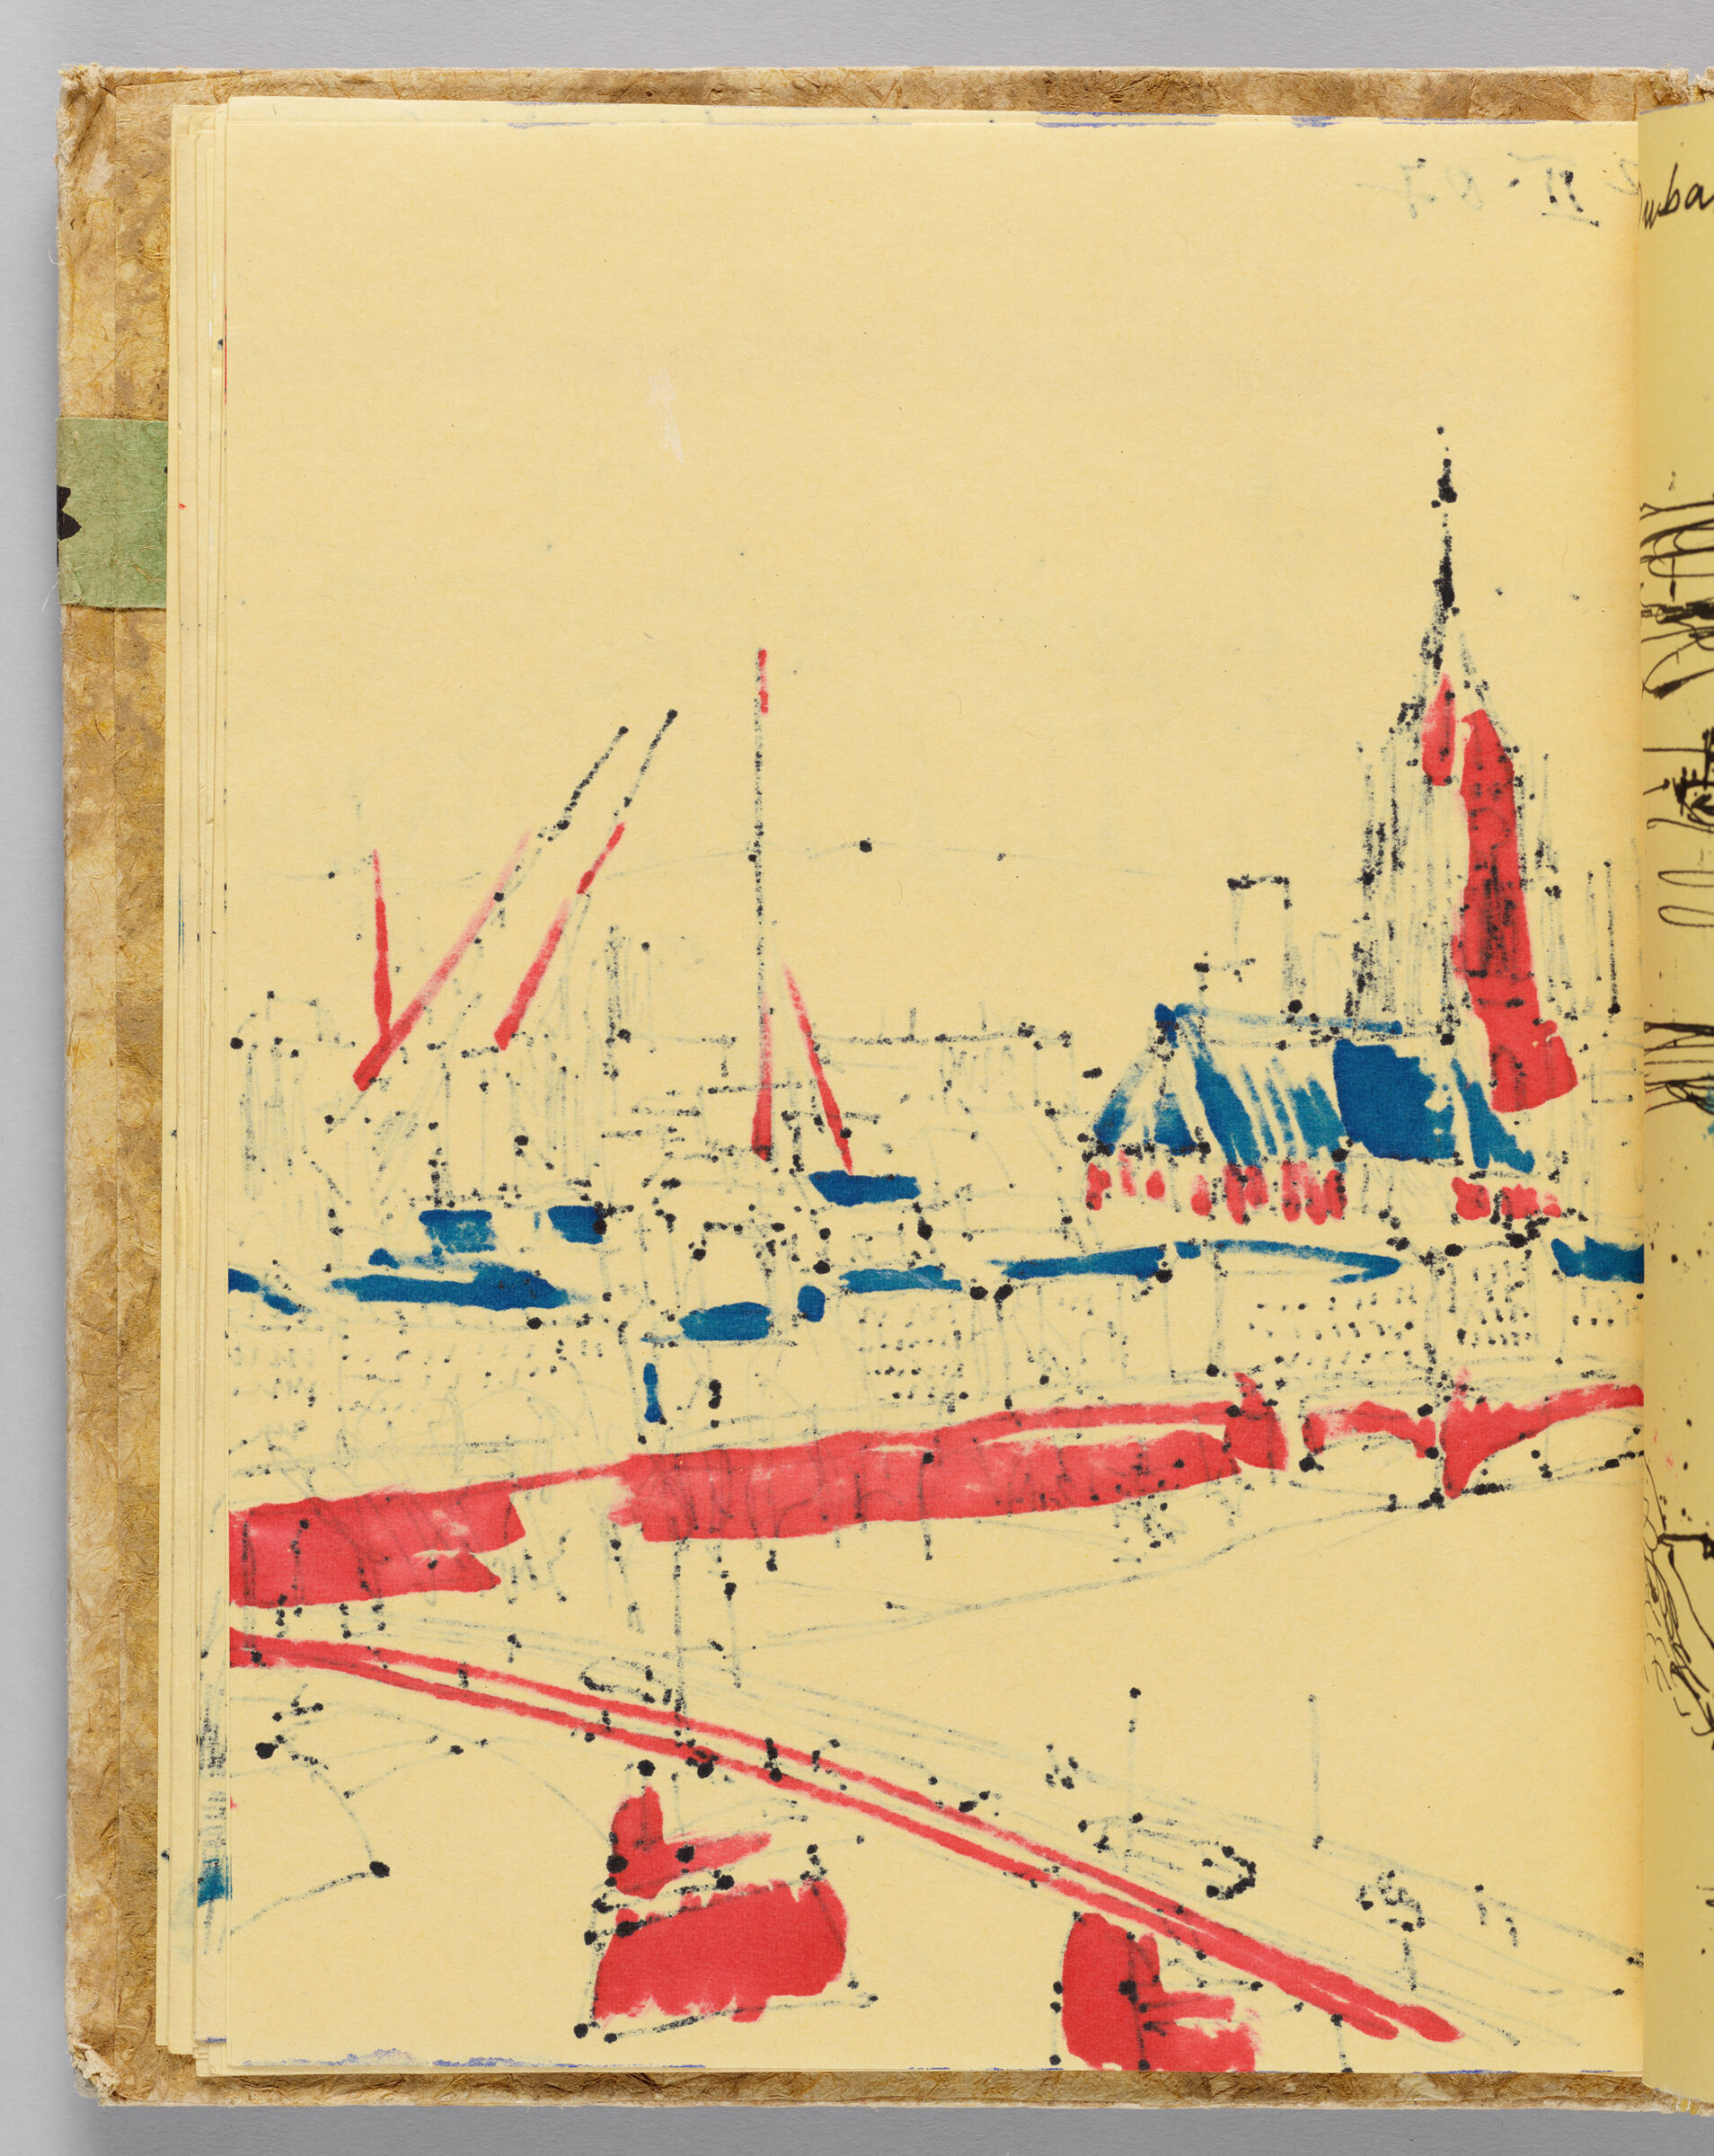 Untitled (Bleed-Through Of Previous Page, Left Page); Untitled (Cityscape [Dubai From Plane], Right Page)